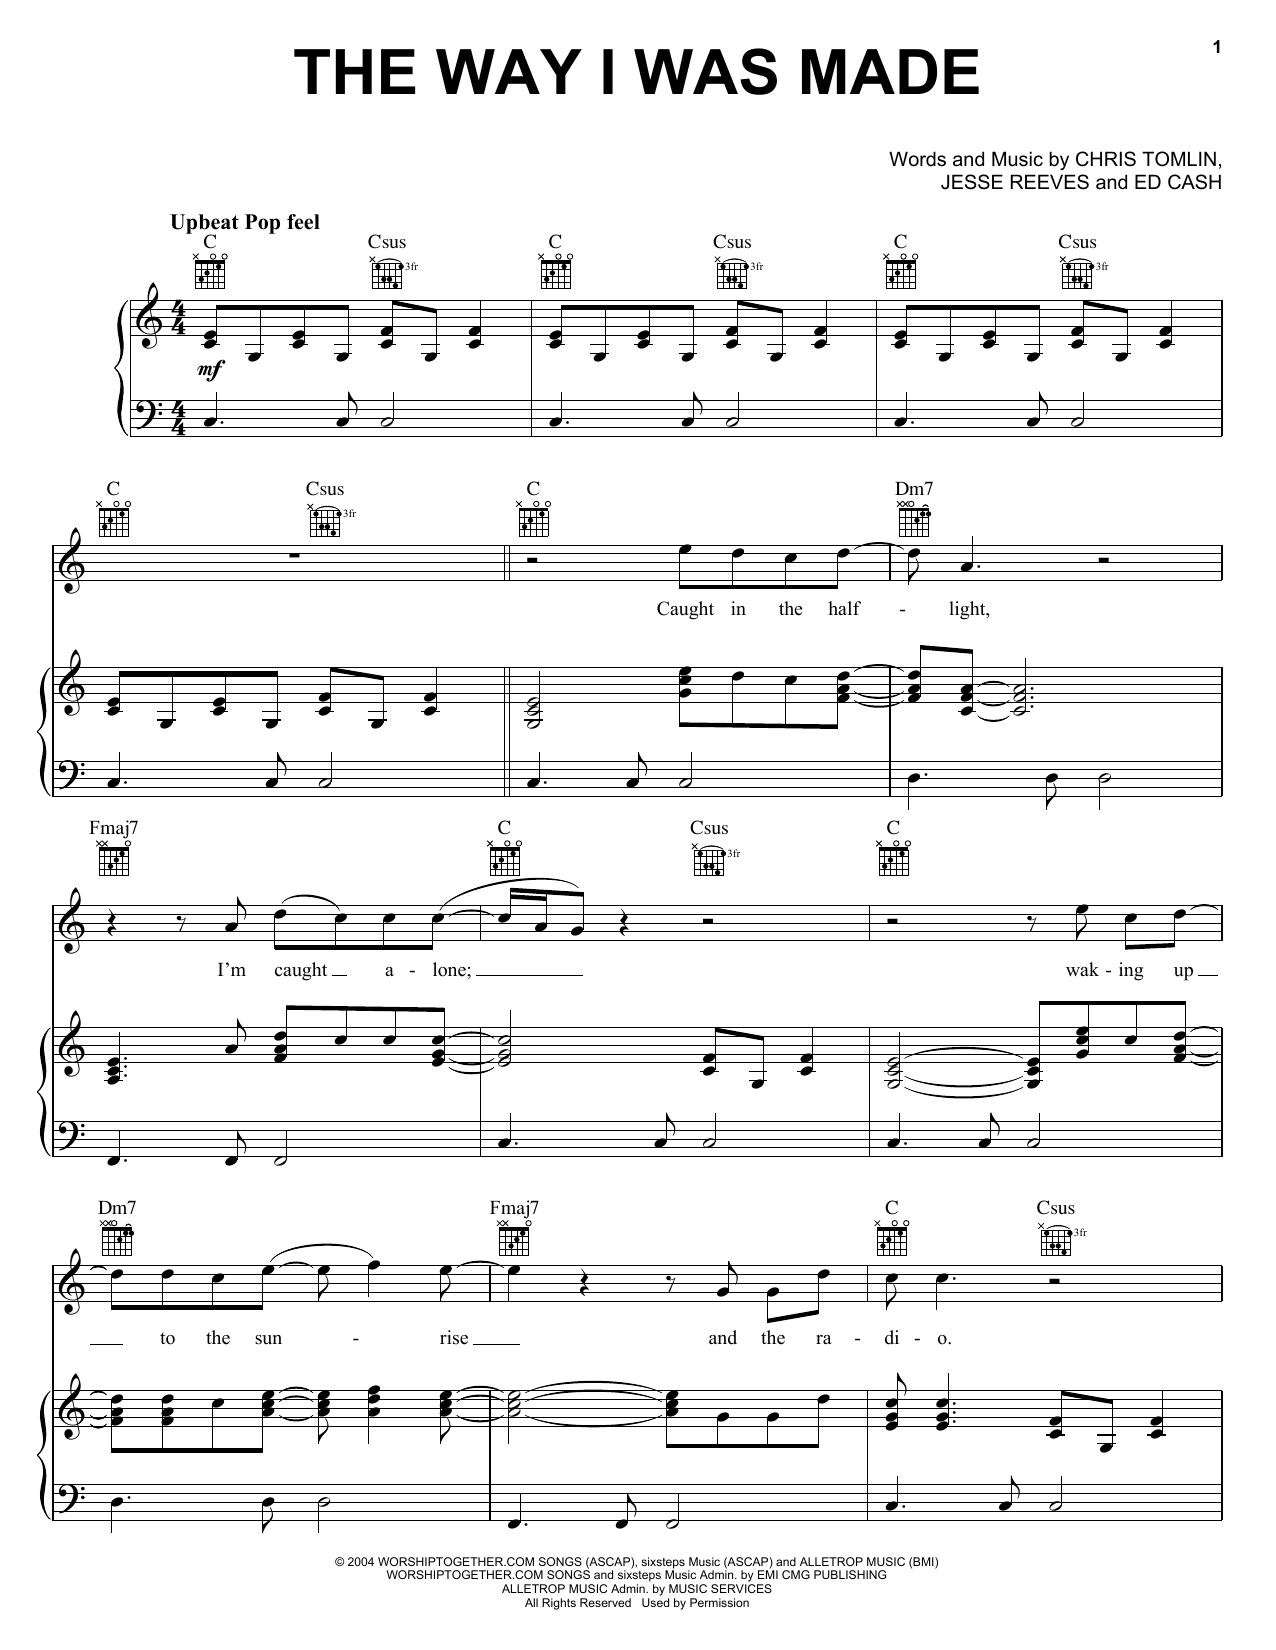 Download Chris Tomlin The Way I Was Made Sheet Music